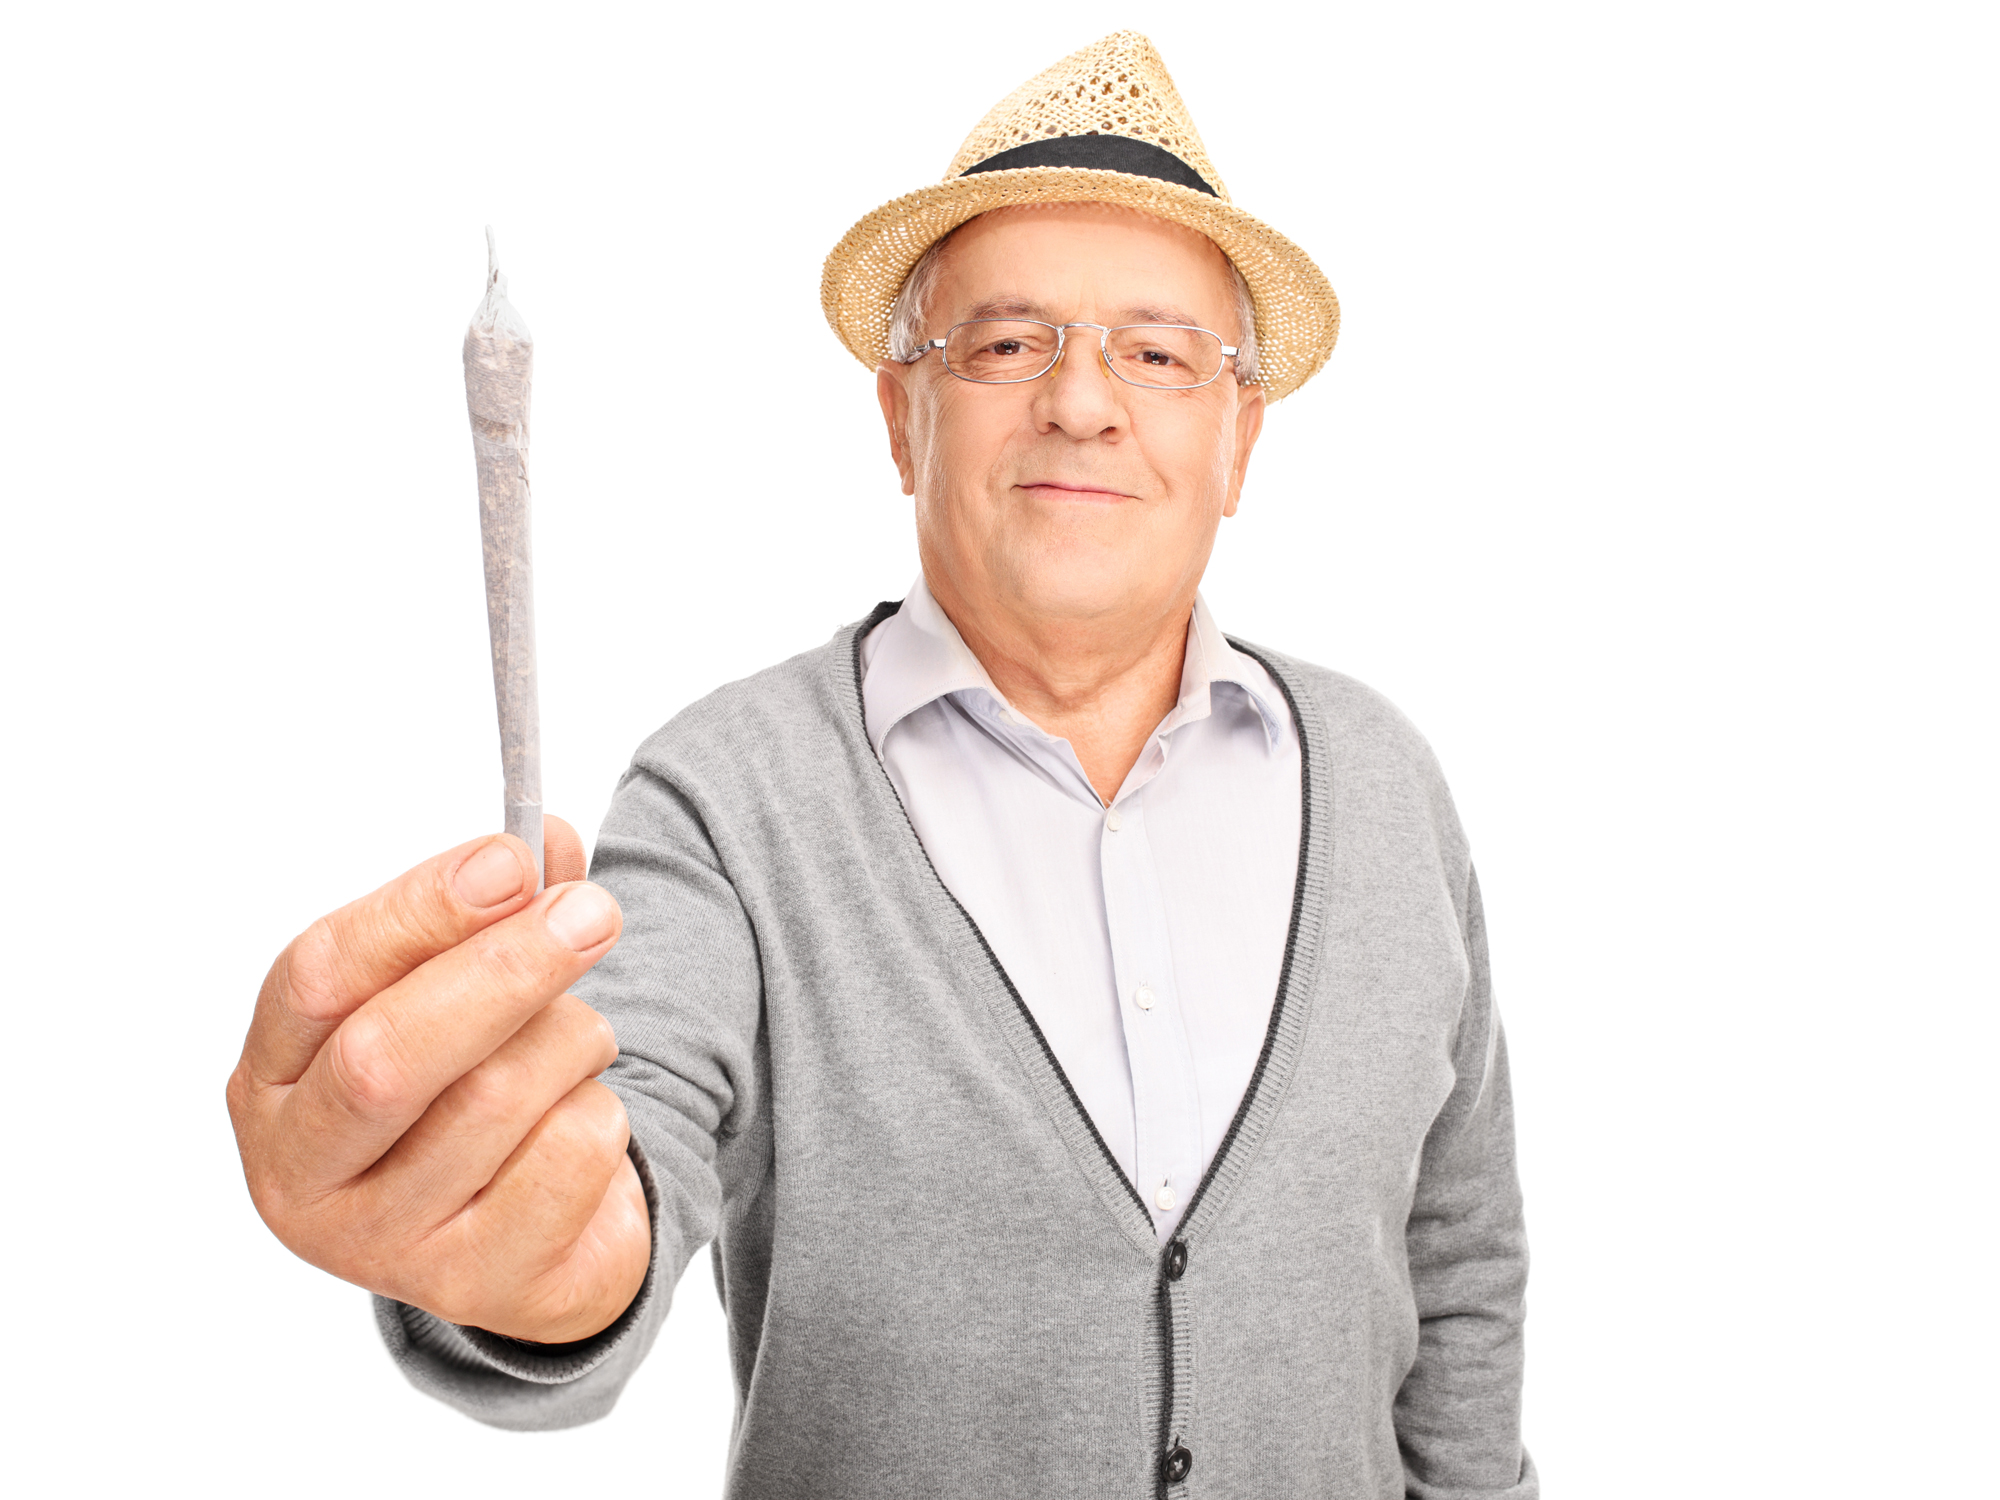 3 Upsides and downsides of medical marijuana from seniors who tried it